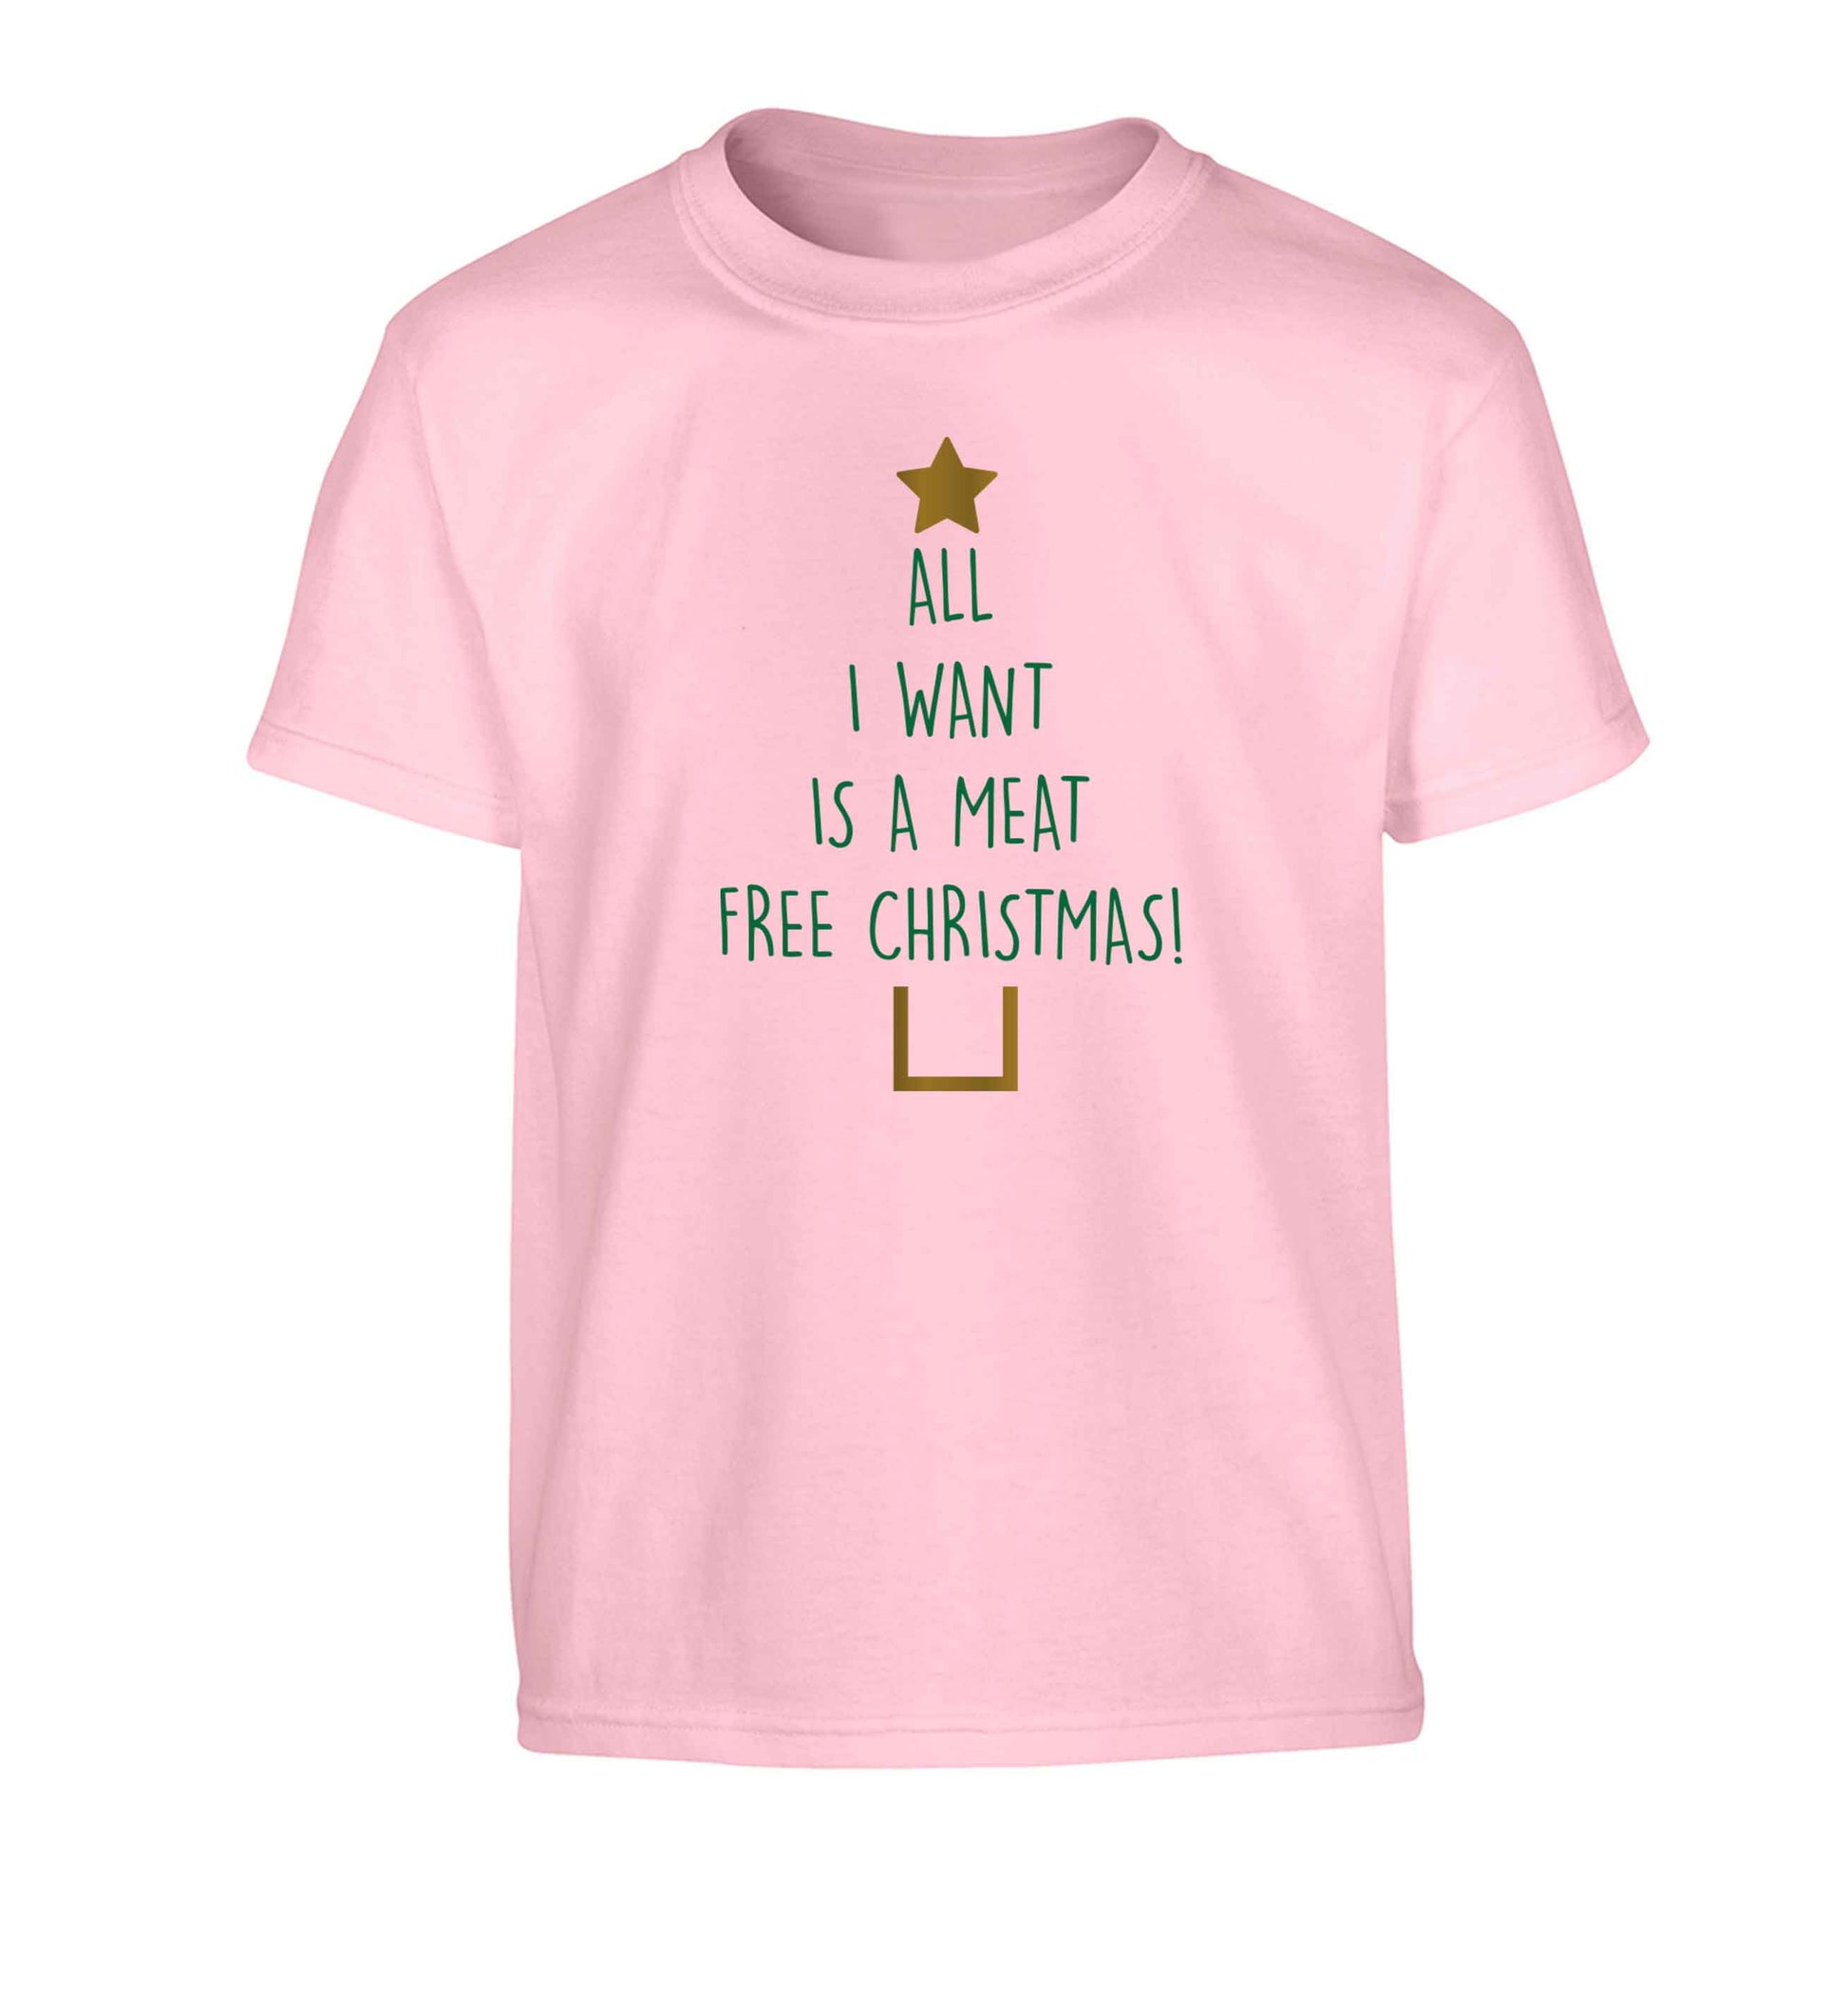 All I want is a meat free Christmas Children's light pink Tshirt 12-13 Years